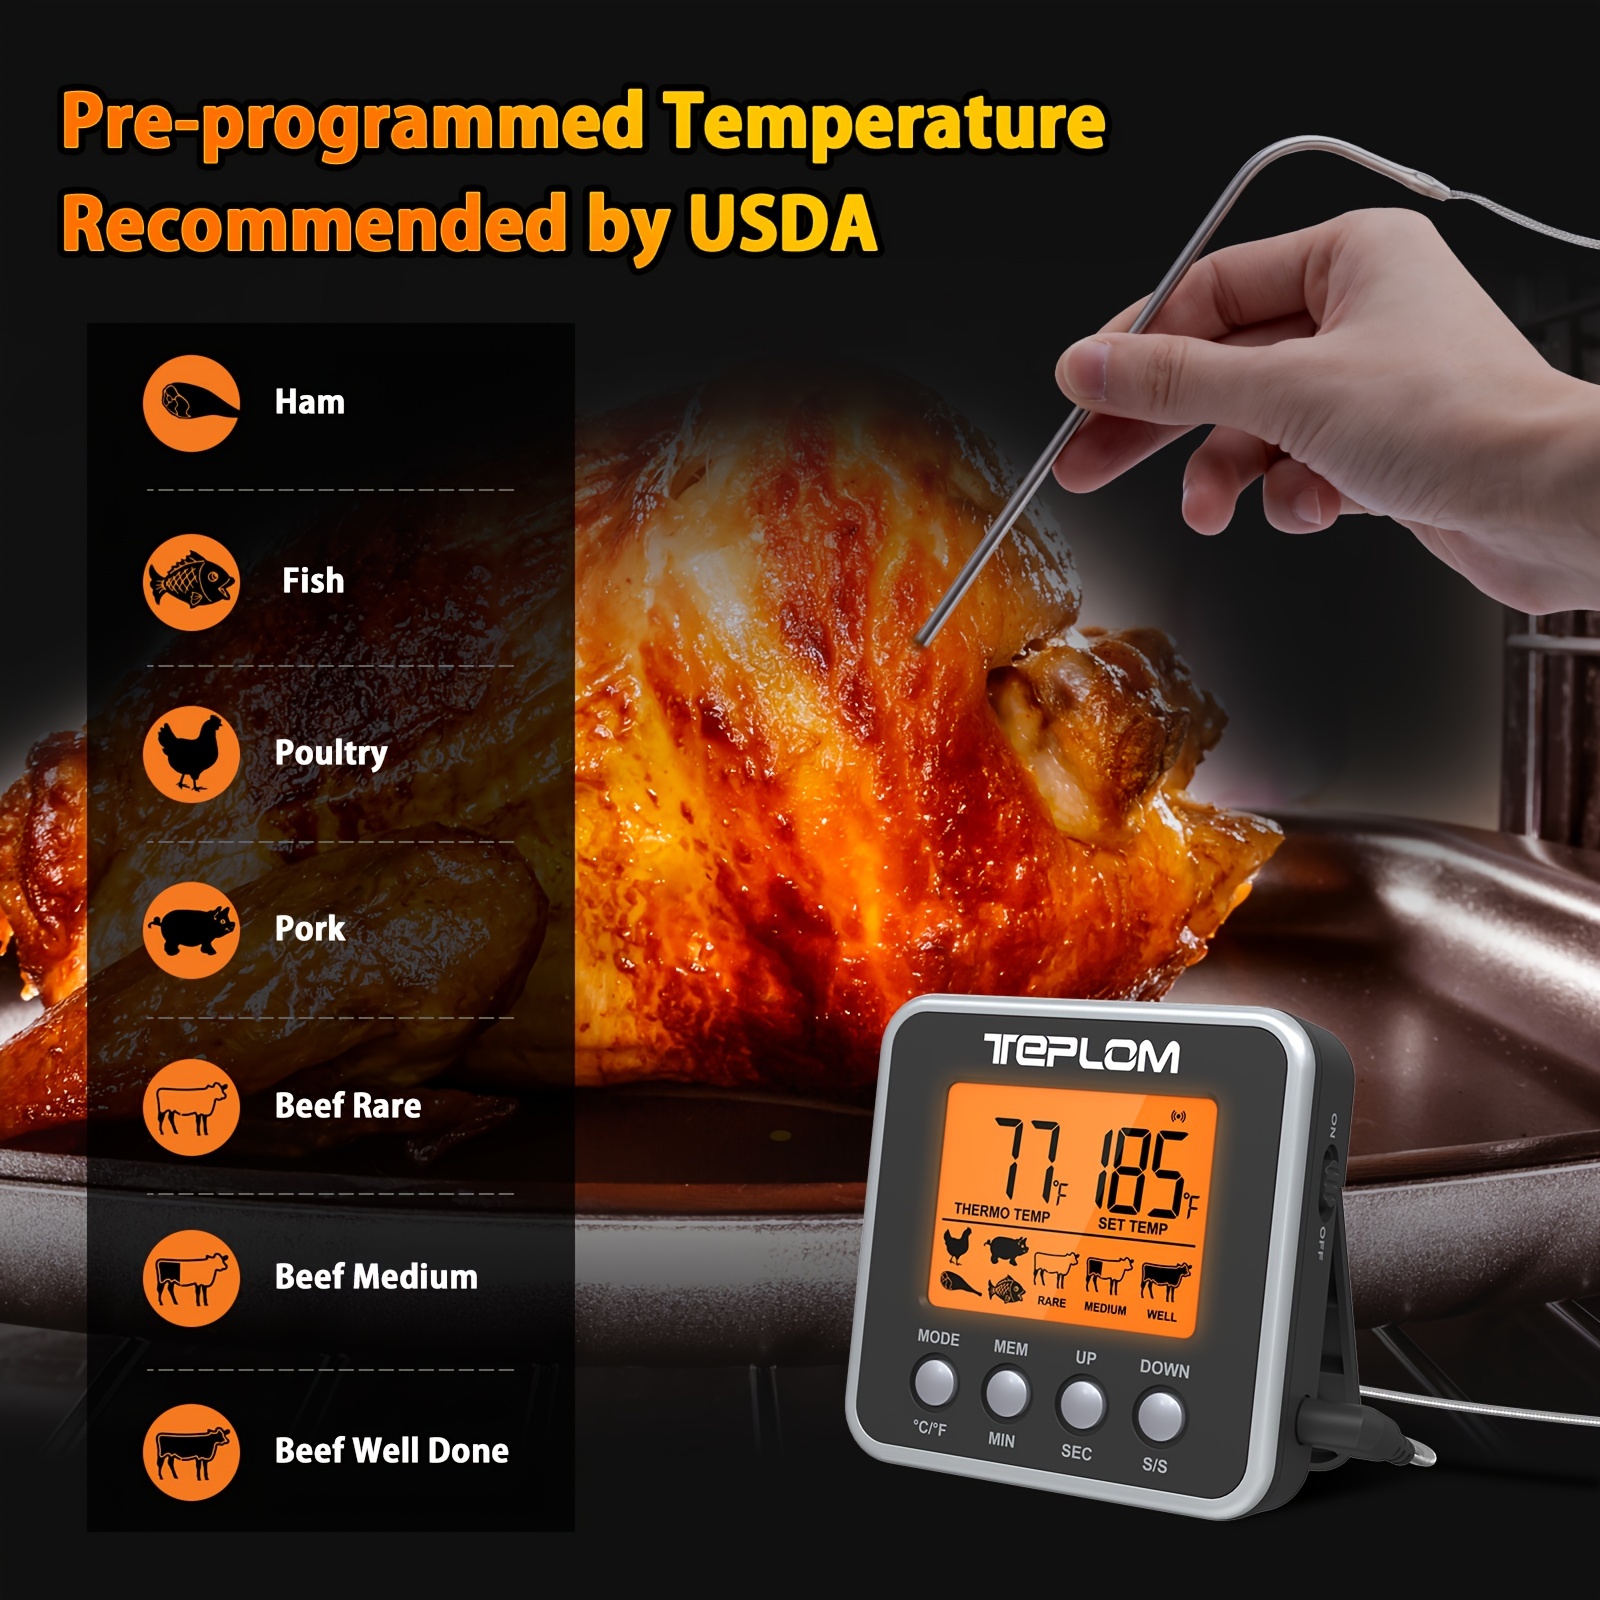 Digital Water Thermometer for Liquid, Digital Instant Read Meat Thermometer  Kitchen Cooking Food Candy Thermometer for Oil Deep Fry BBQ Grill Smoker  Thermometer 